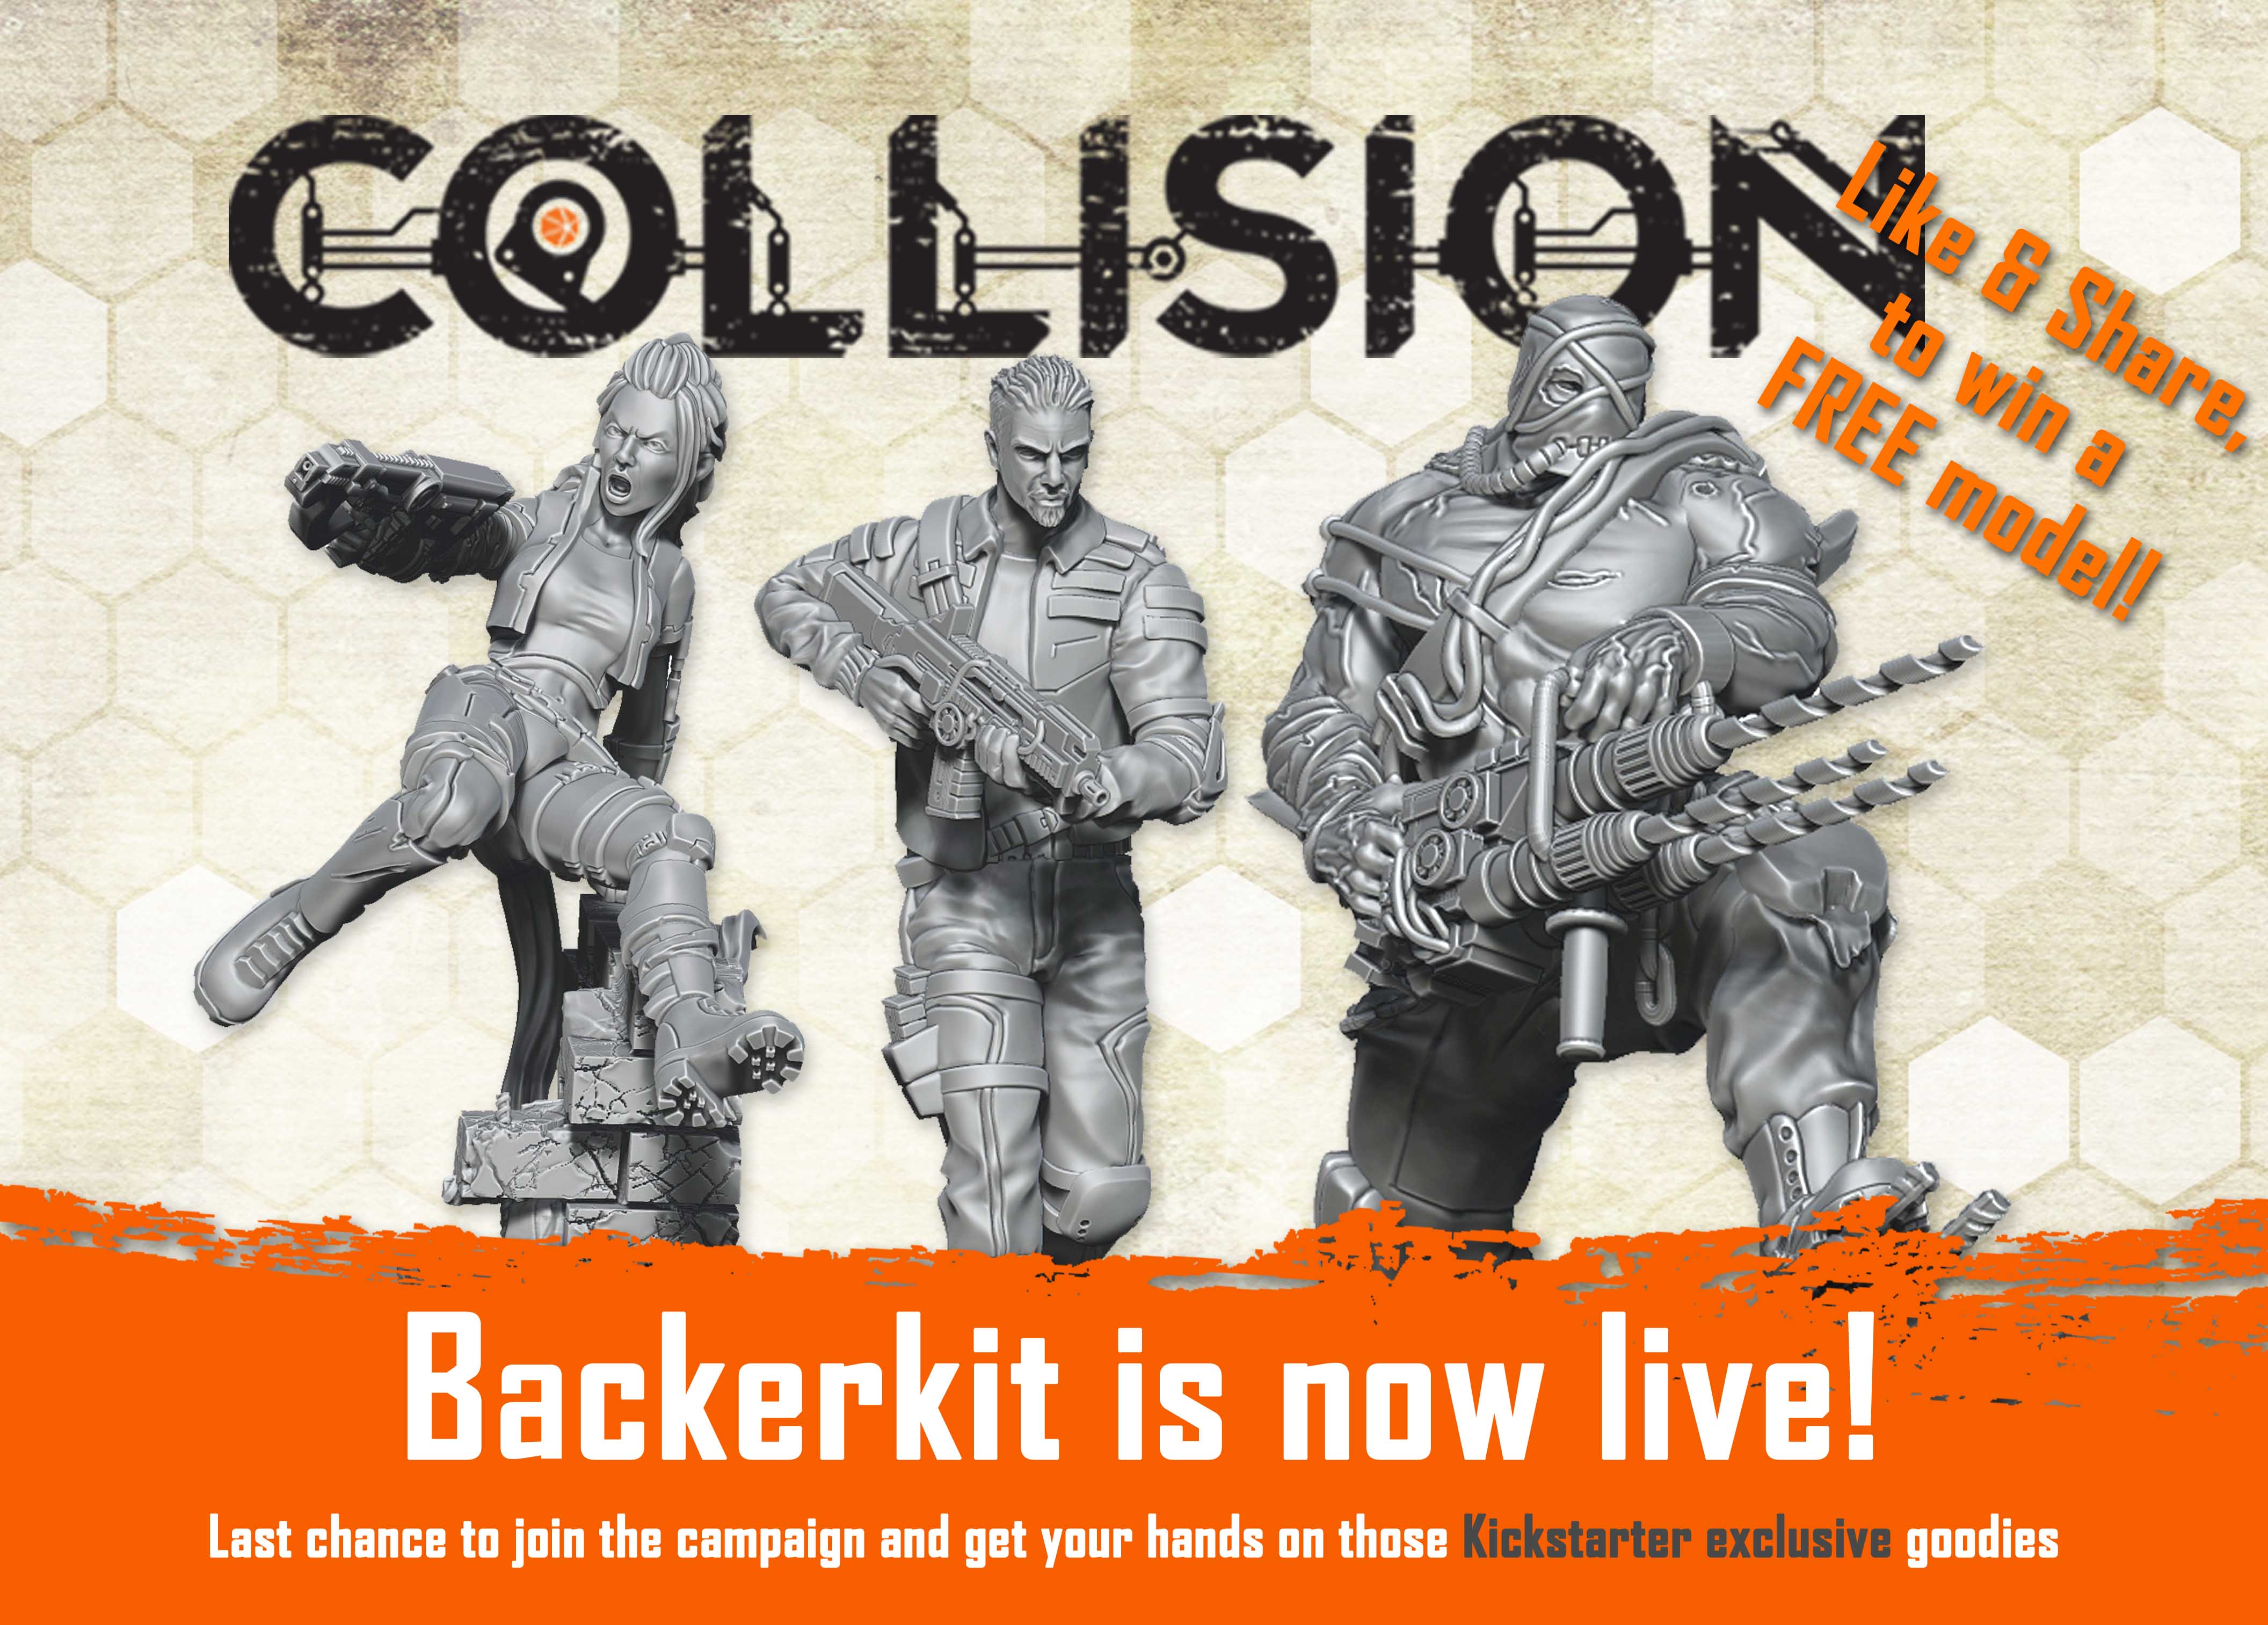 Our BackerKit page is now live! This is your last chance to back Collision and get hold of those awesome Kickstarter campaign exclusives. 